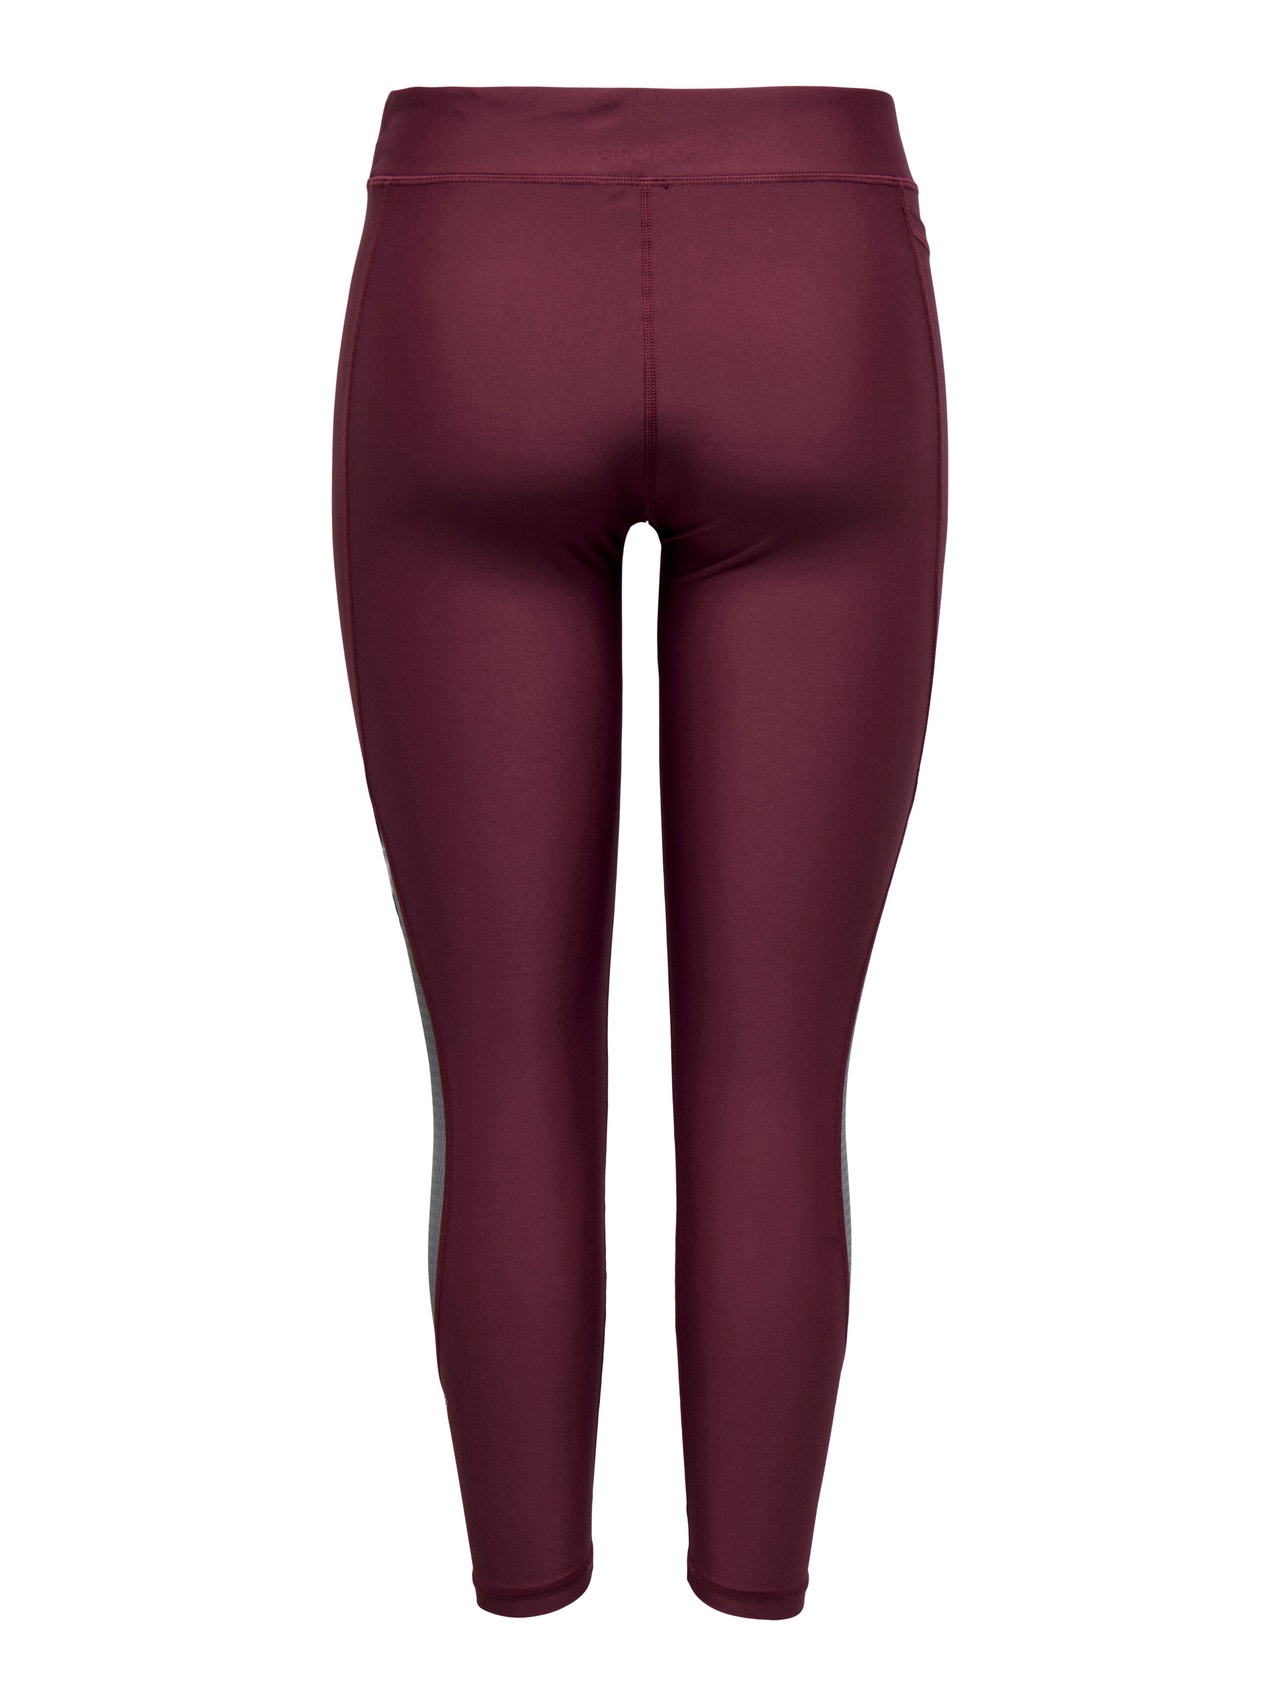 ONLY Tight Fit High waist Leggings -Windsor Wine - 15294976